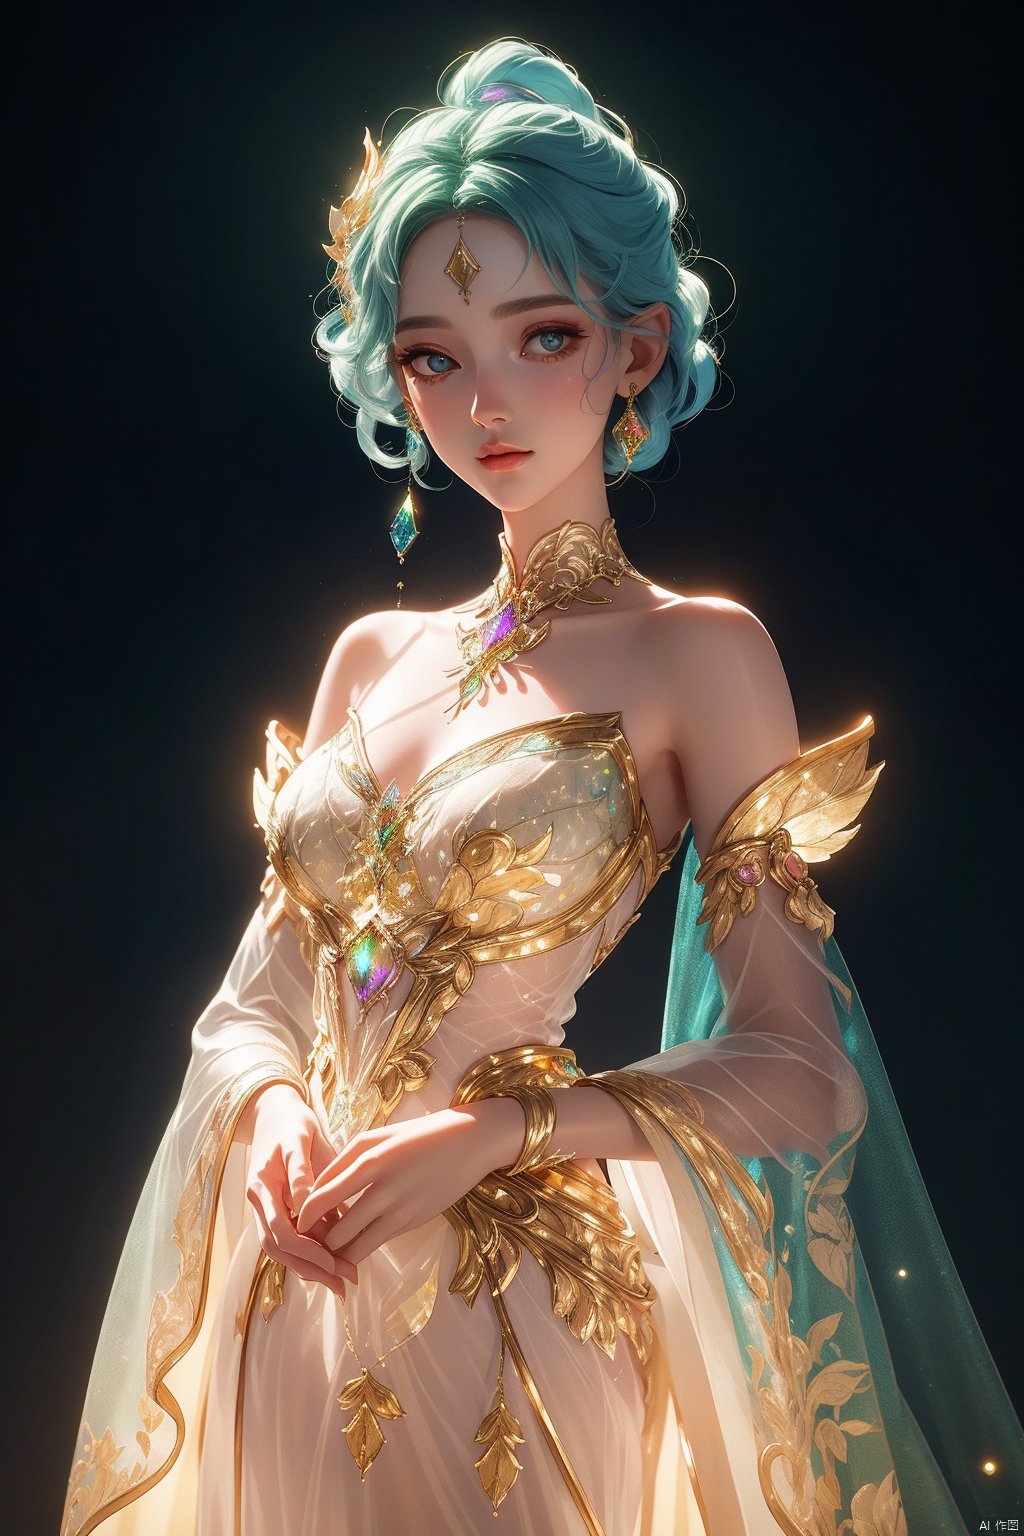  extremely delicate iridiscent a woman made of Translucent glowing glass, translucent, tiny golden accents, beautifully and intricately detailed, ethereal glow, whimsical, art by Mschiffer, best quality, glass art, magical holographic glow,arms hidden on back,